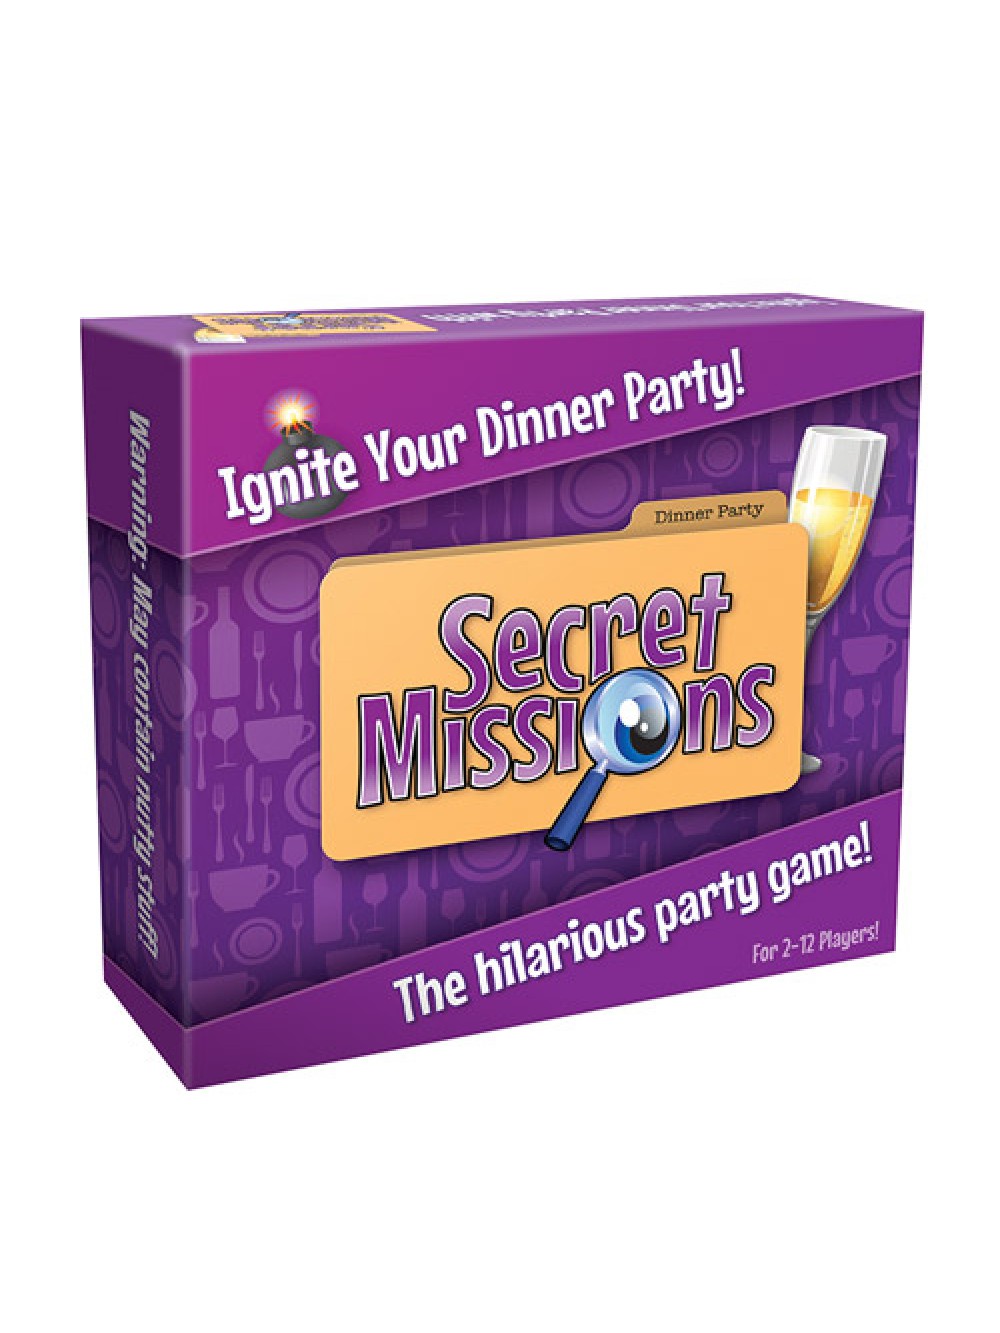 Secret Missions Dinner Party Game 5037353000840